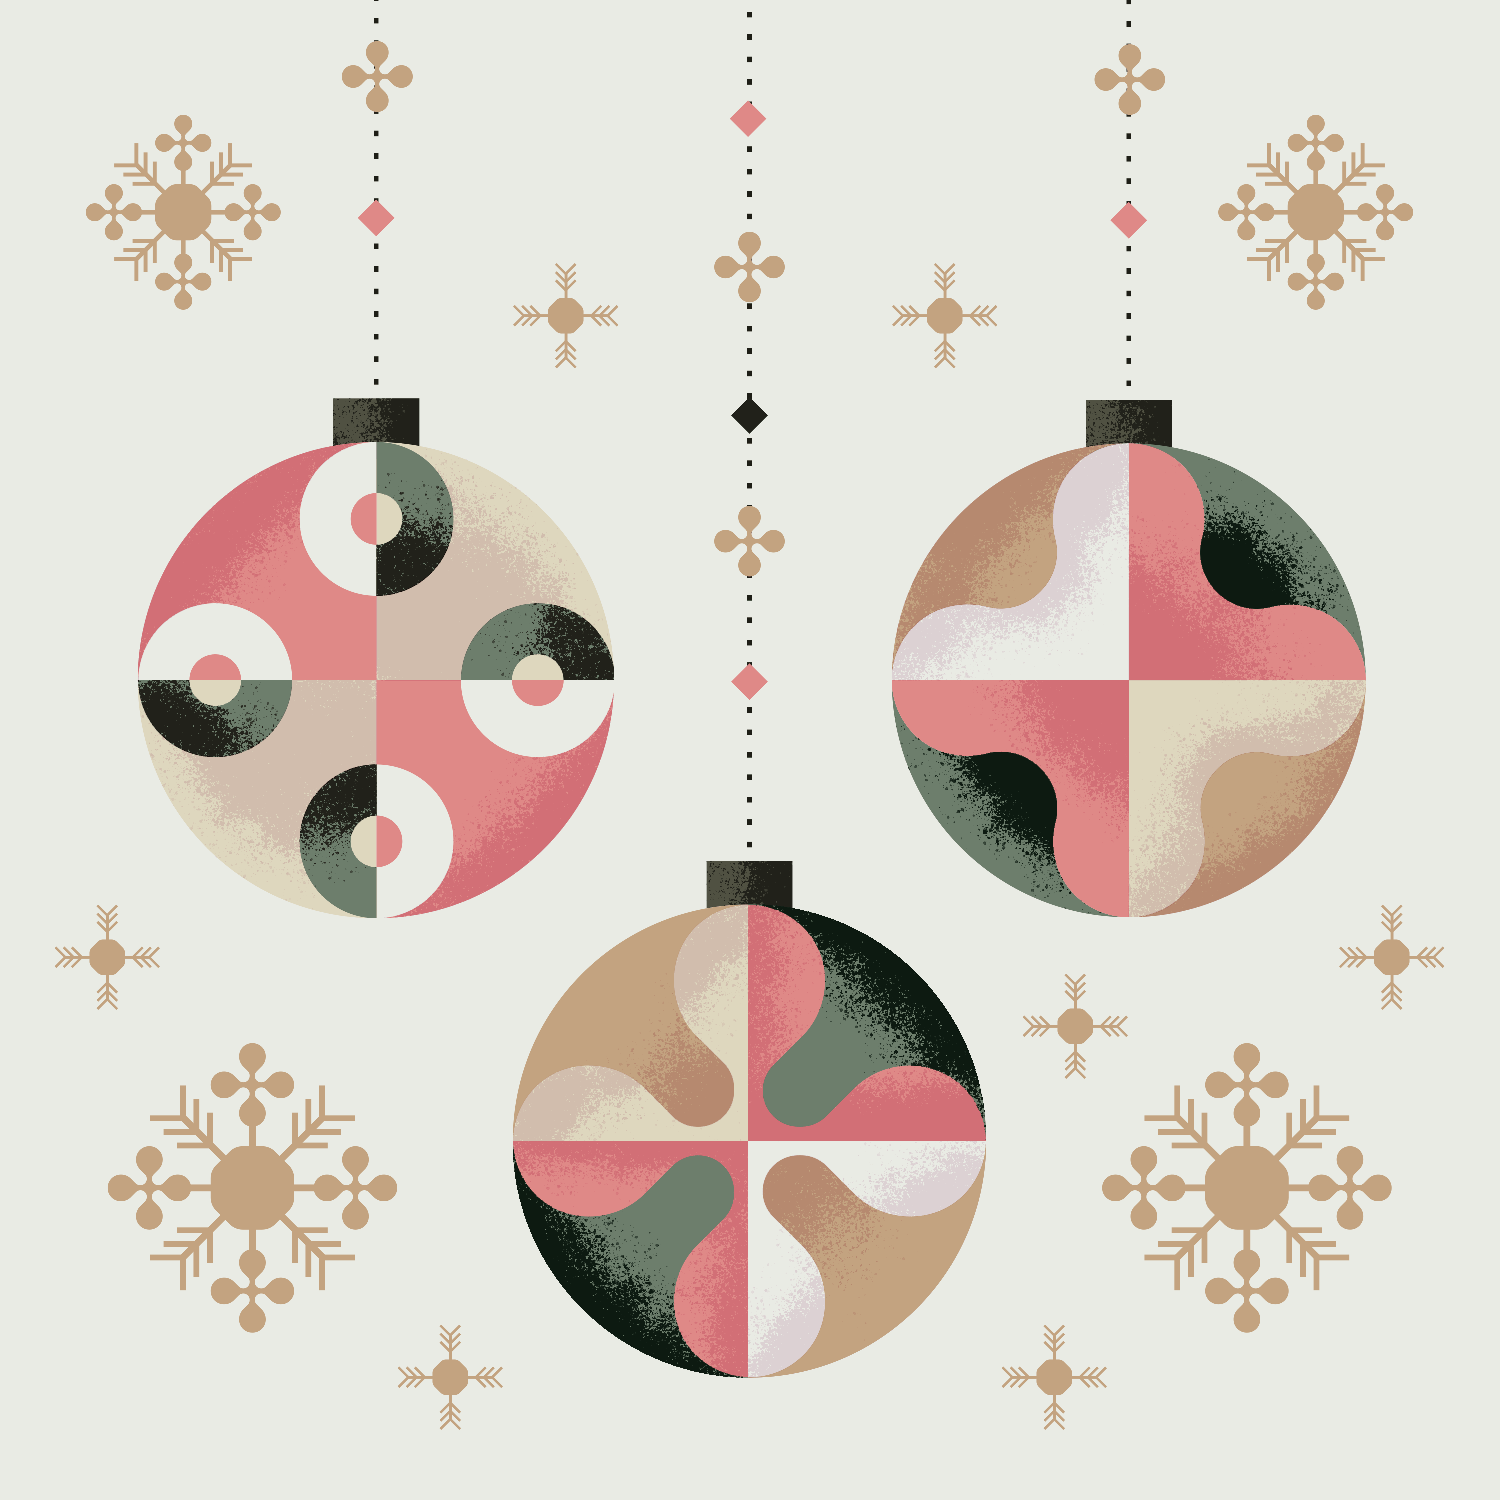 Holiday Illustration as part of a Content Strategy by Phidev